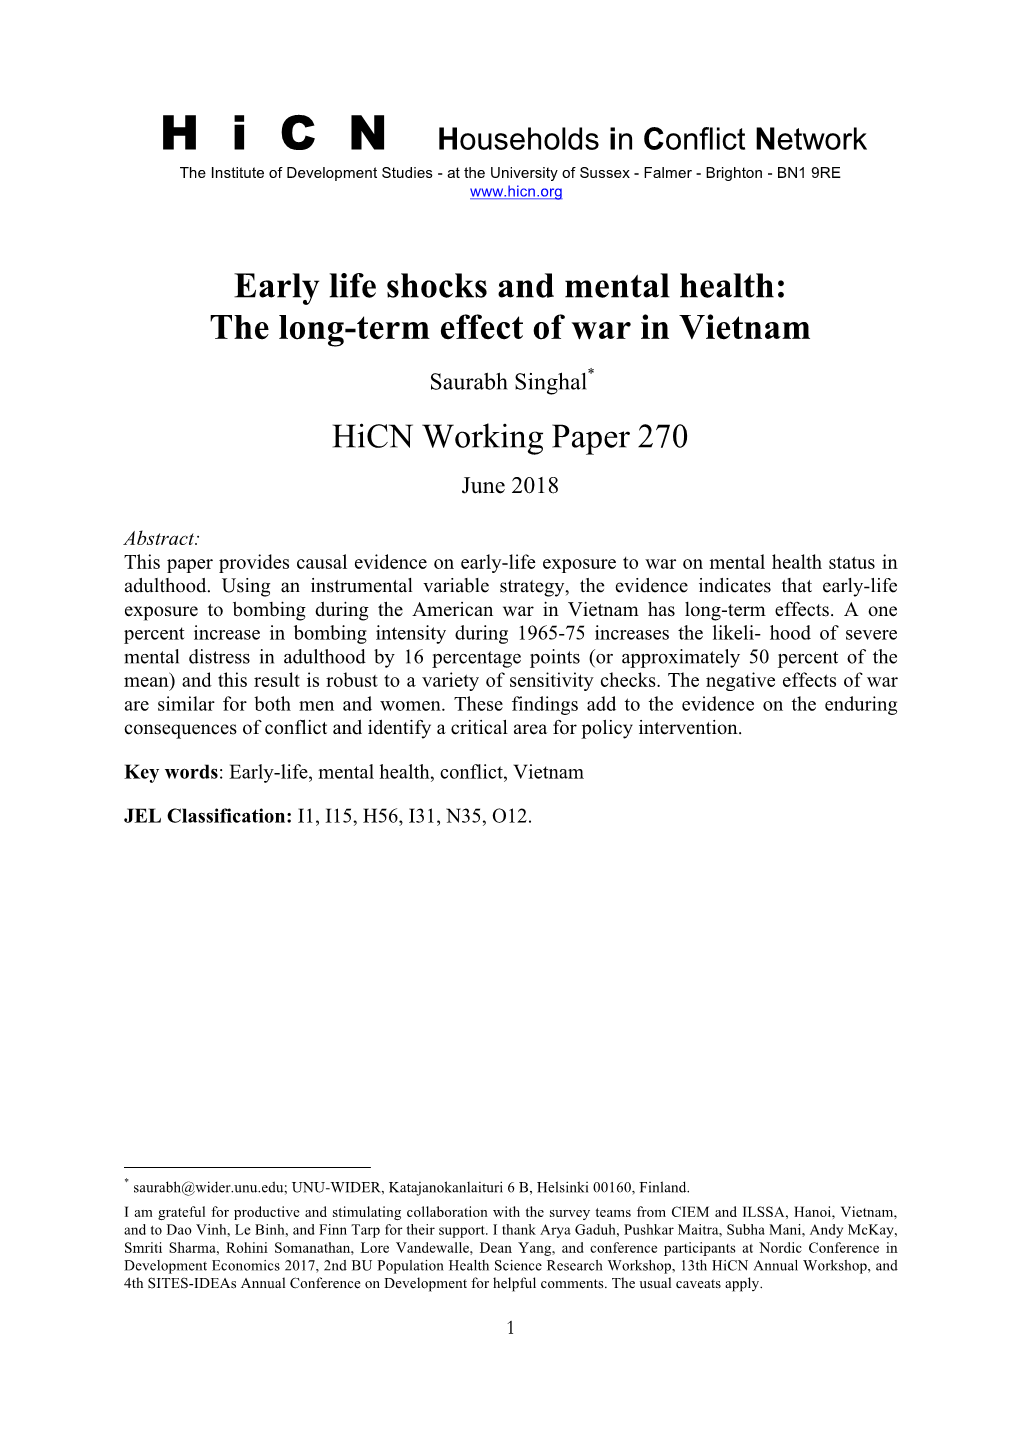 Early Life Shocks and Mental Health: the Long-Term Effect of War in Vietnam